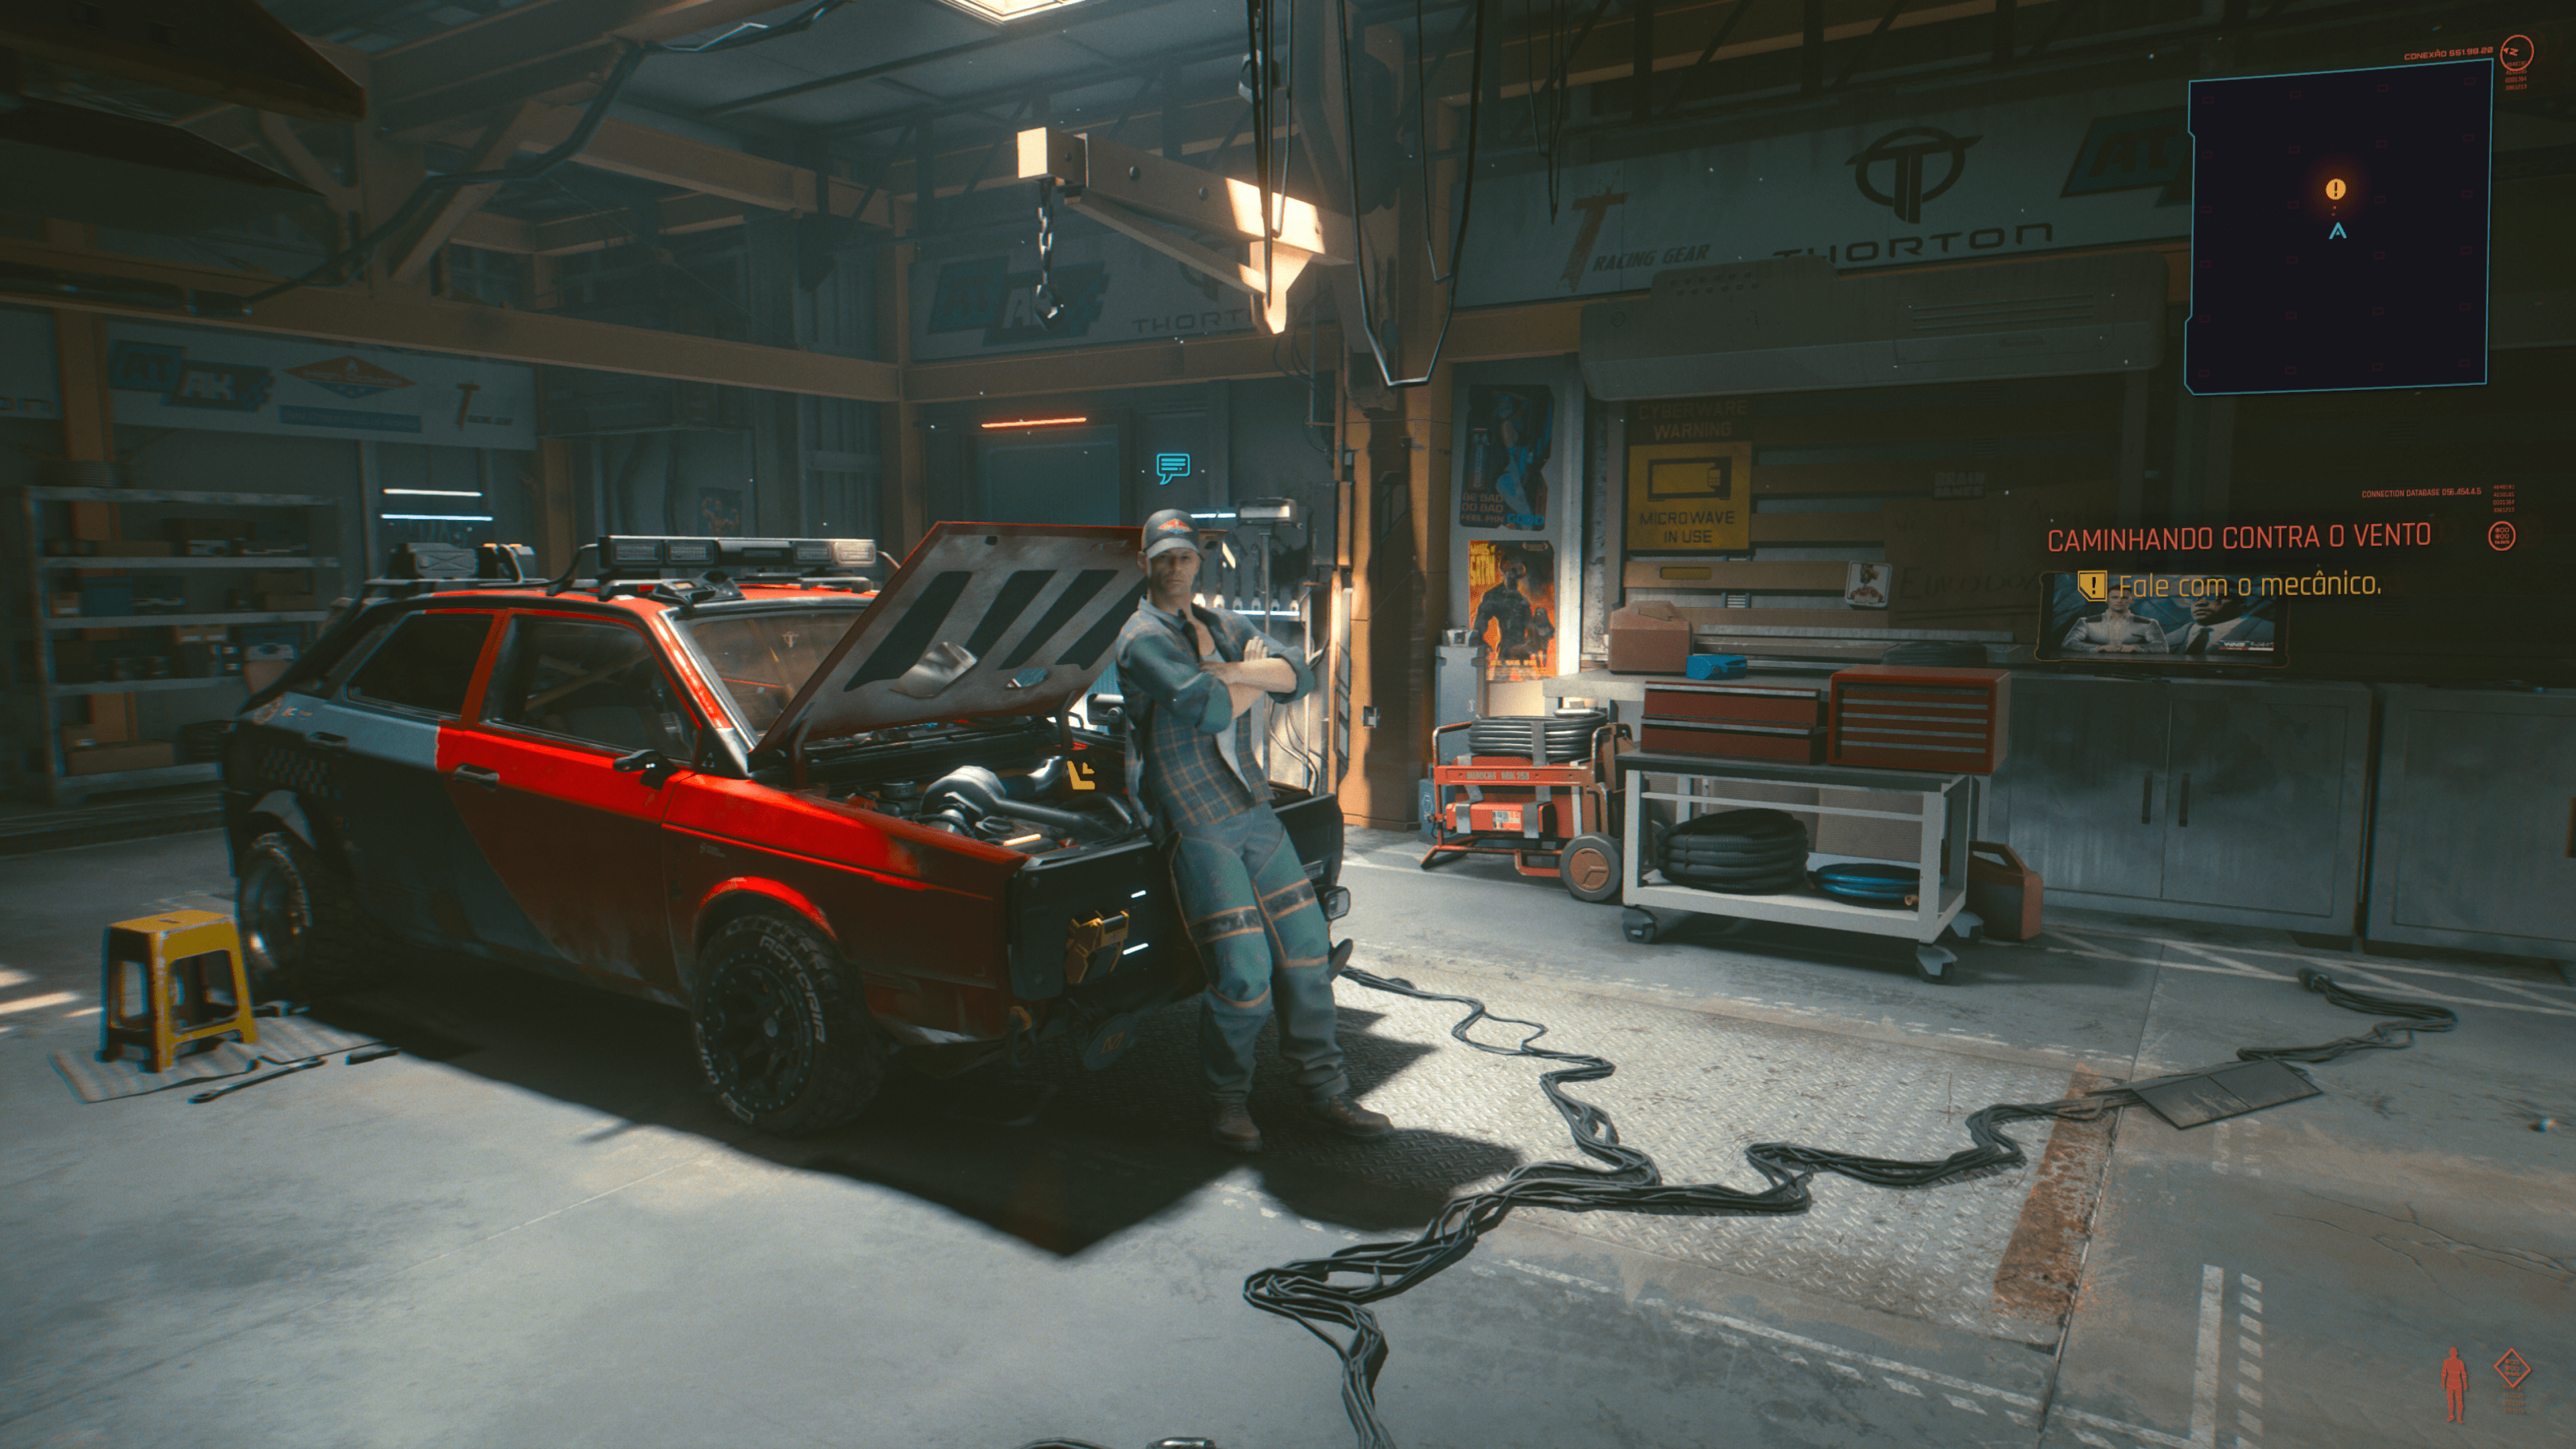 Cyberpunk garage hd games k wallpapers images backgrounds photos and pictures